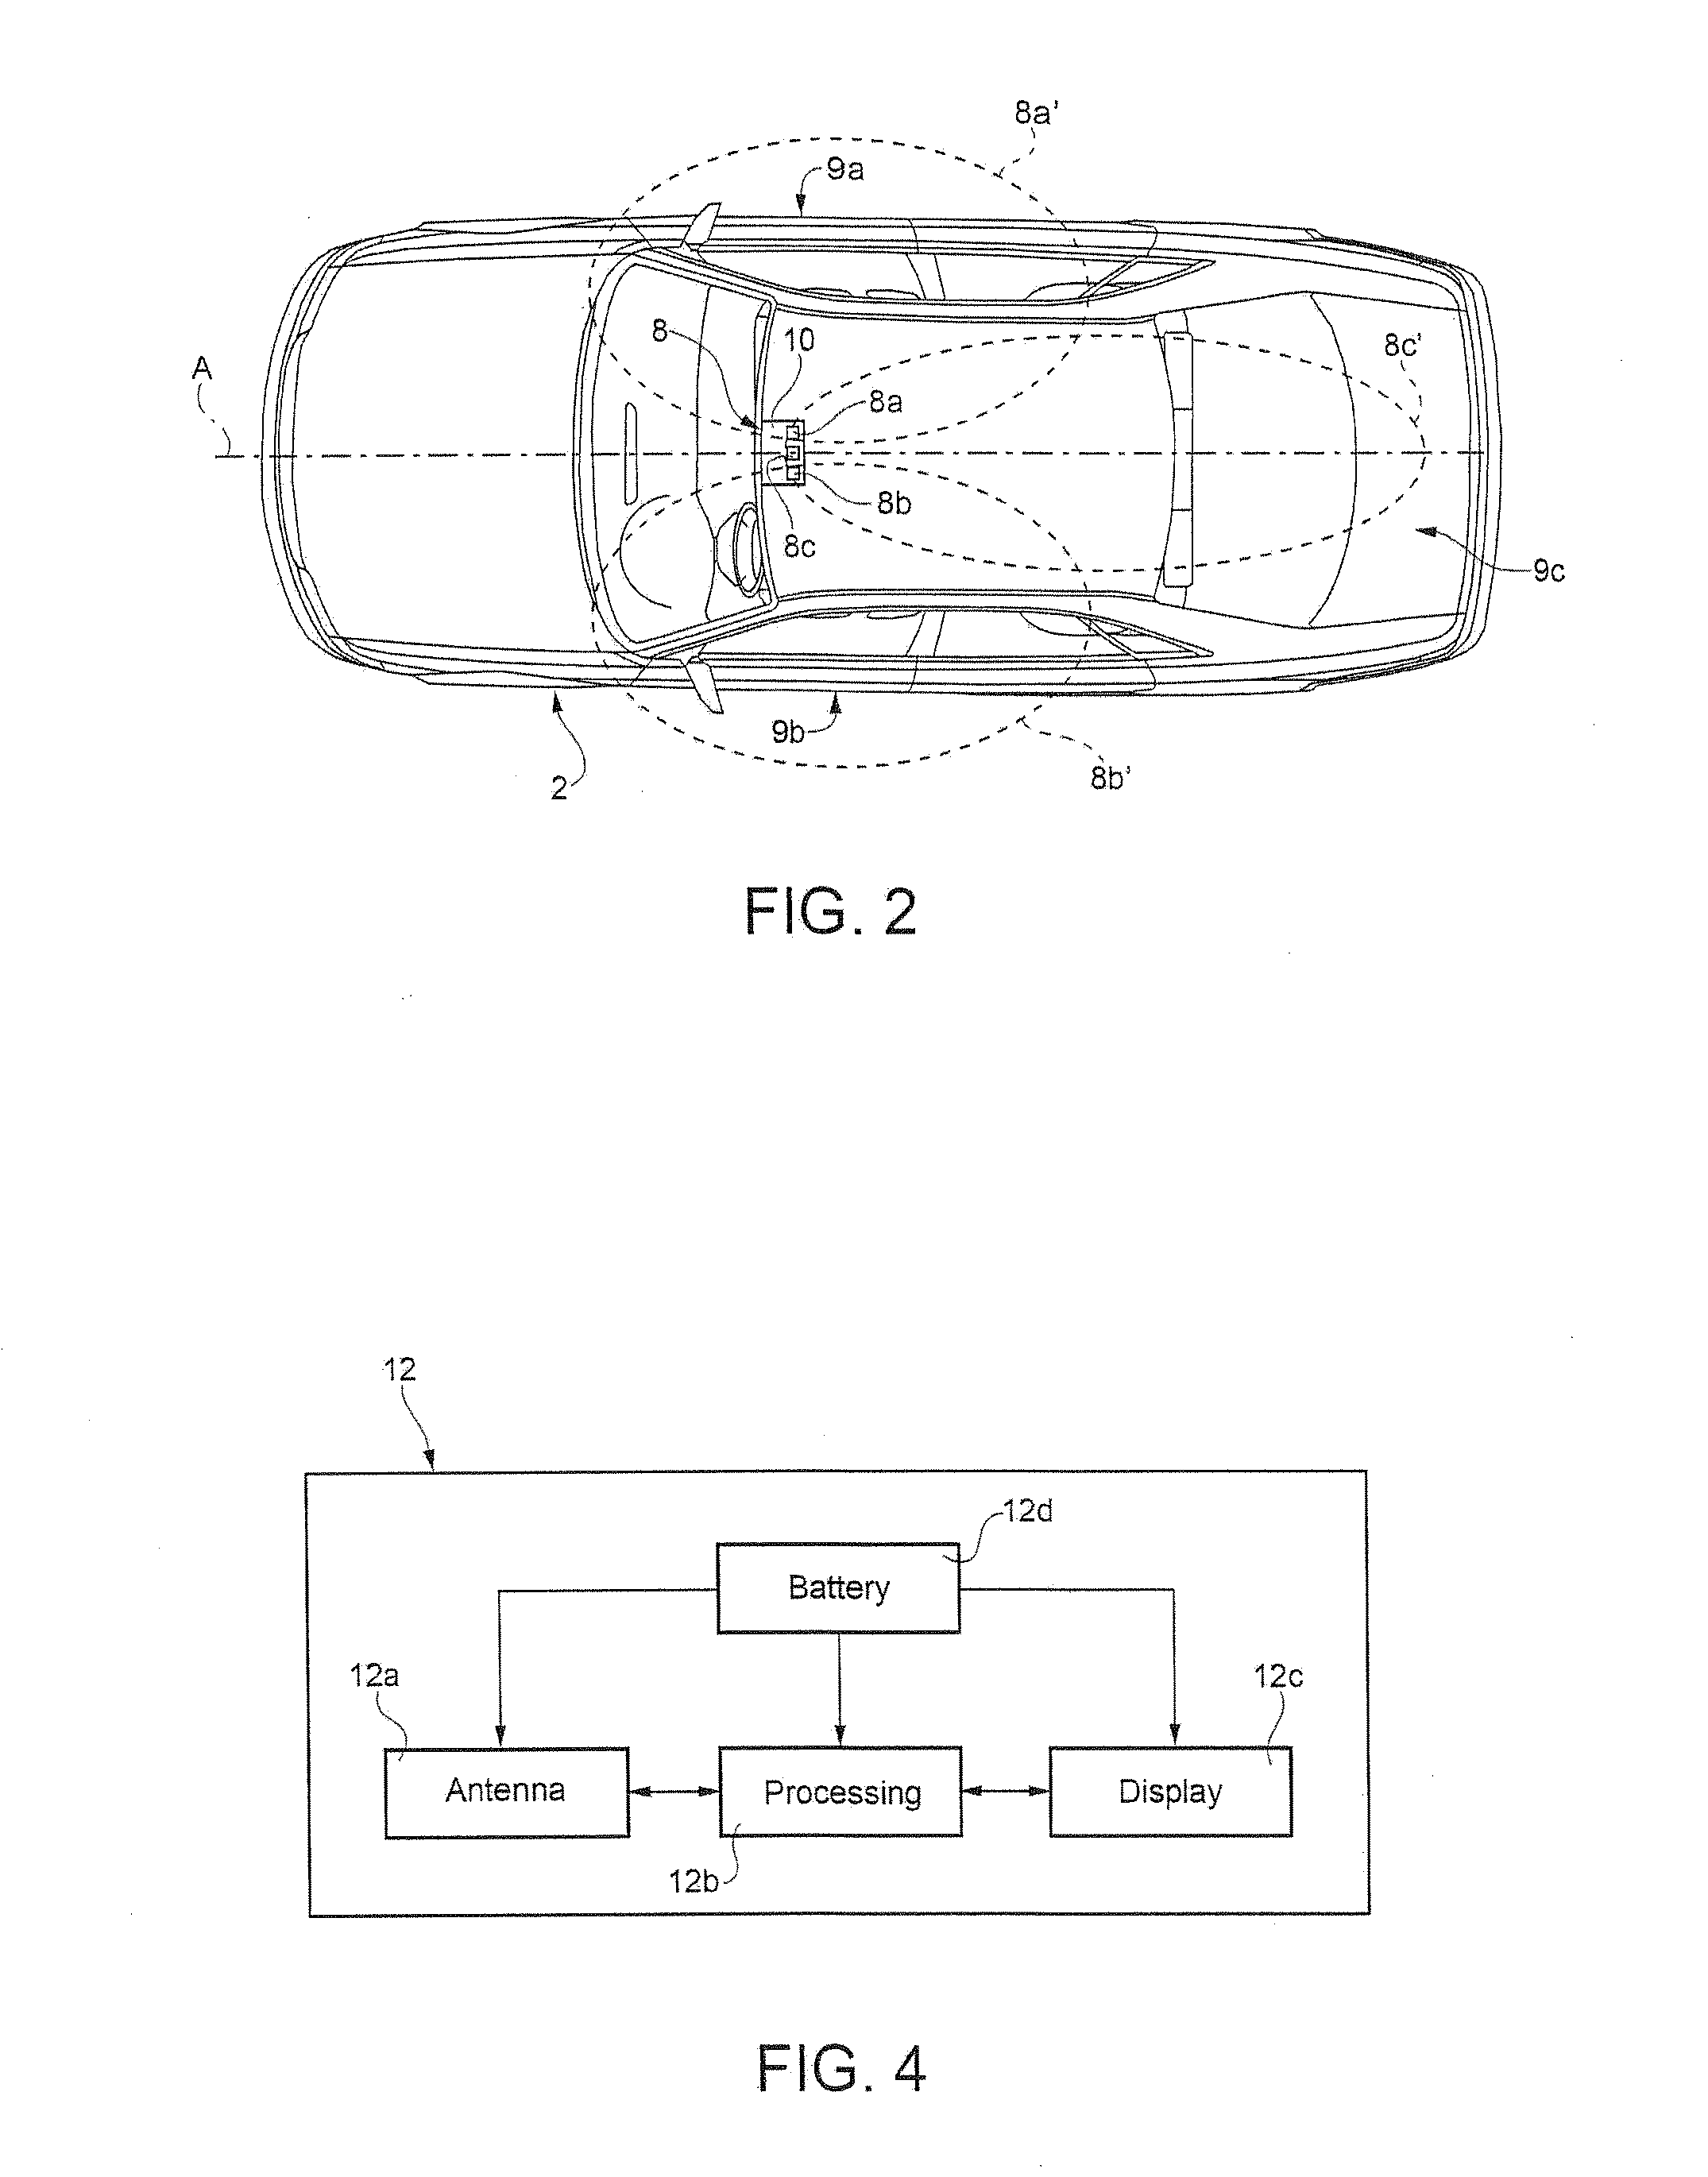 System for passive entry and passive start for a motor vehicle